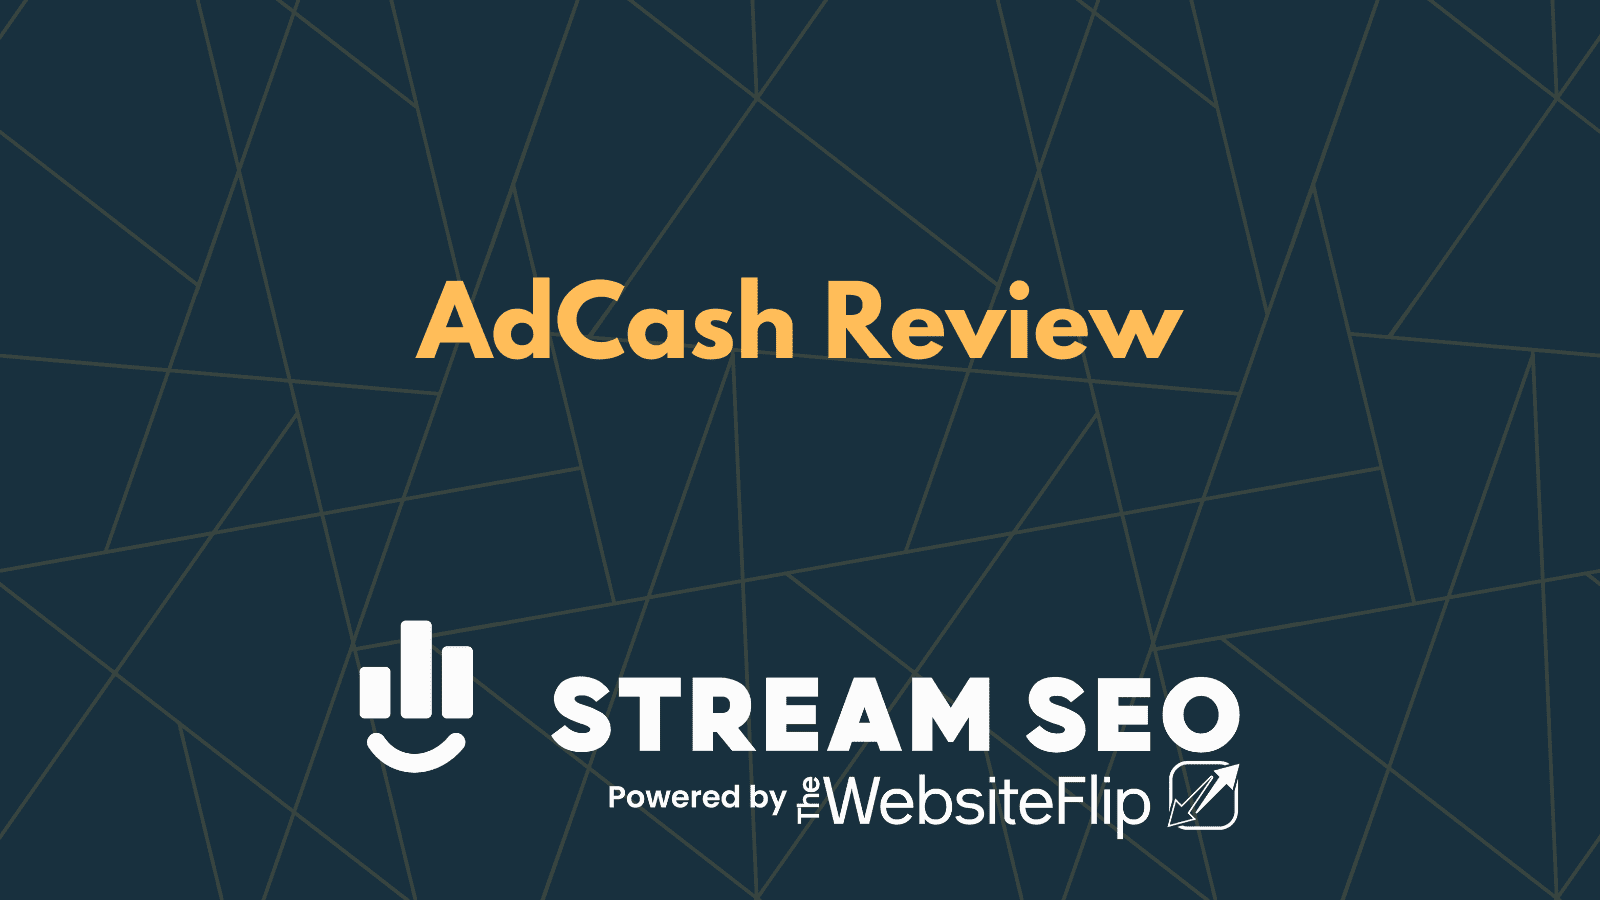 Adcash Review – Make $1000s/month + 5% Referrals